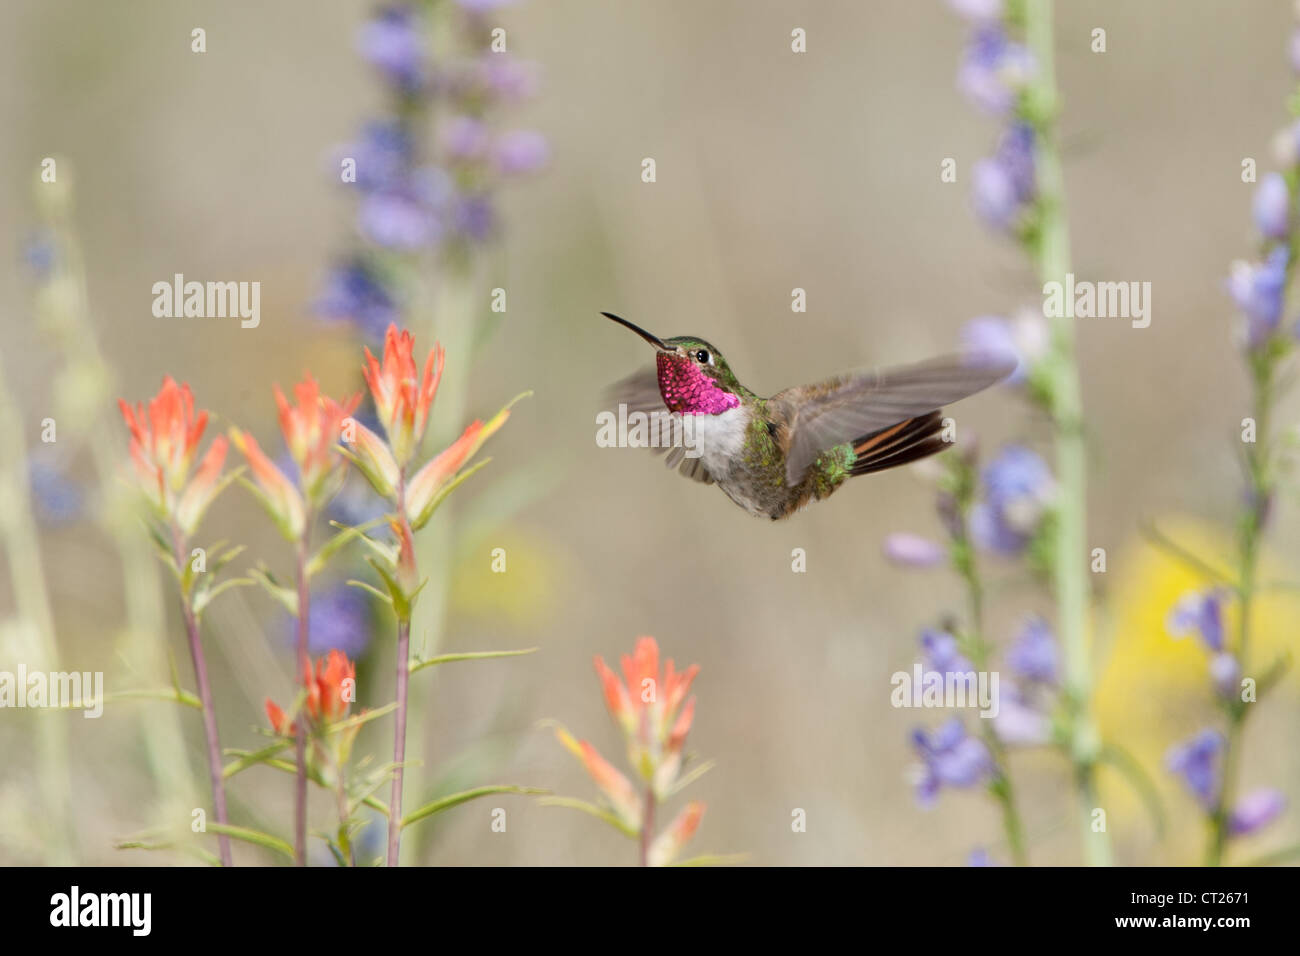 A Broad-tailed Hummingbird bird hovering in Penstemon and Indian Paintbrush flowers blooms blossoms seeking nectar Stock Photo